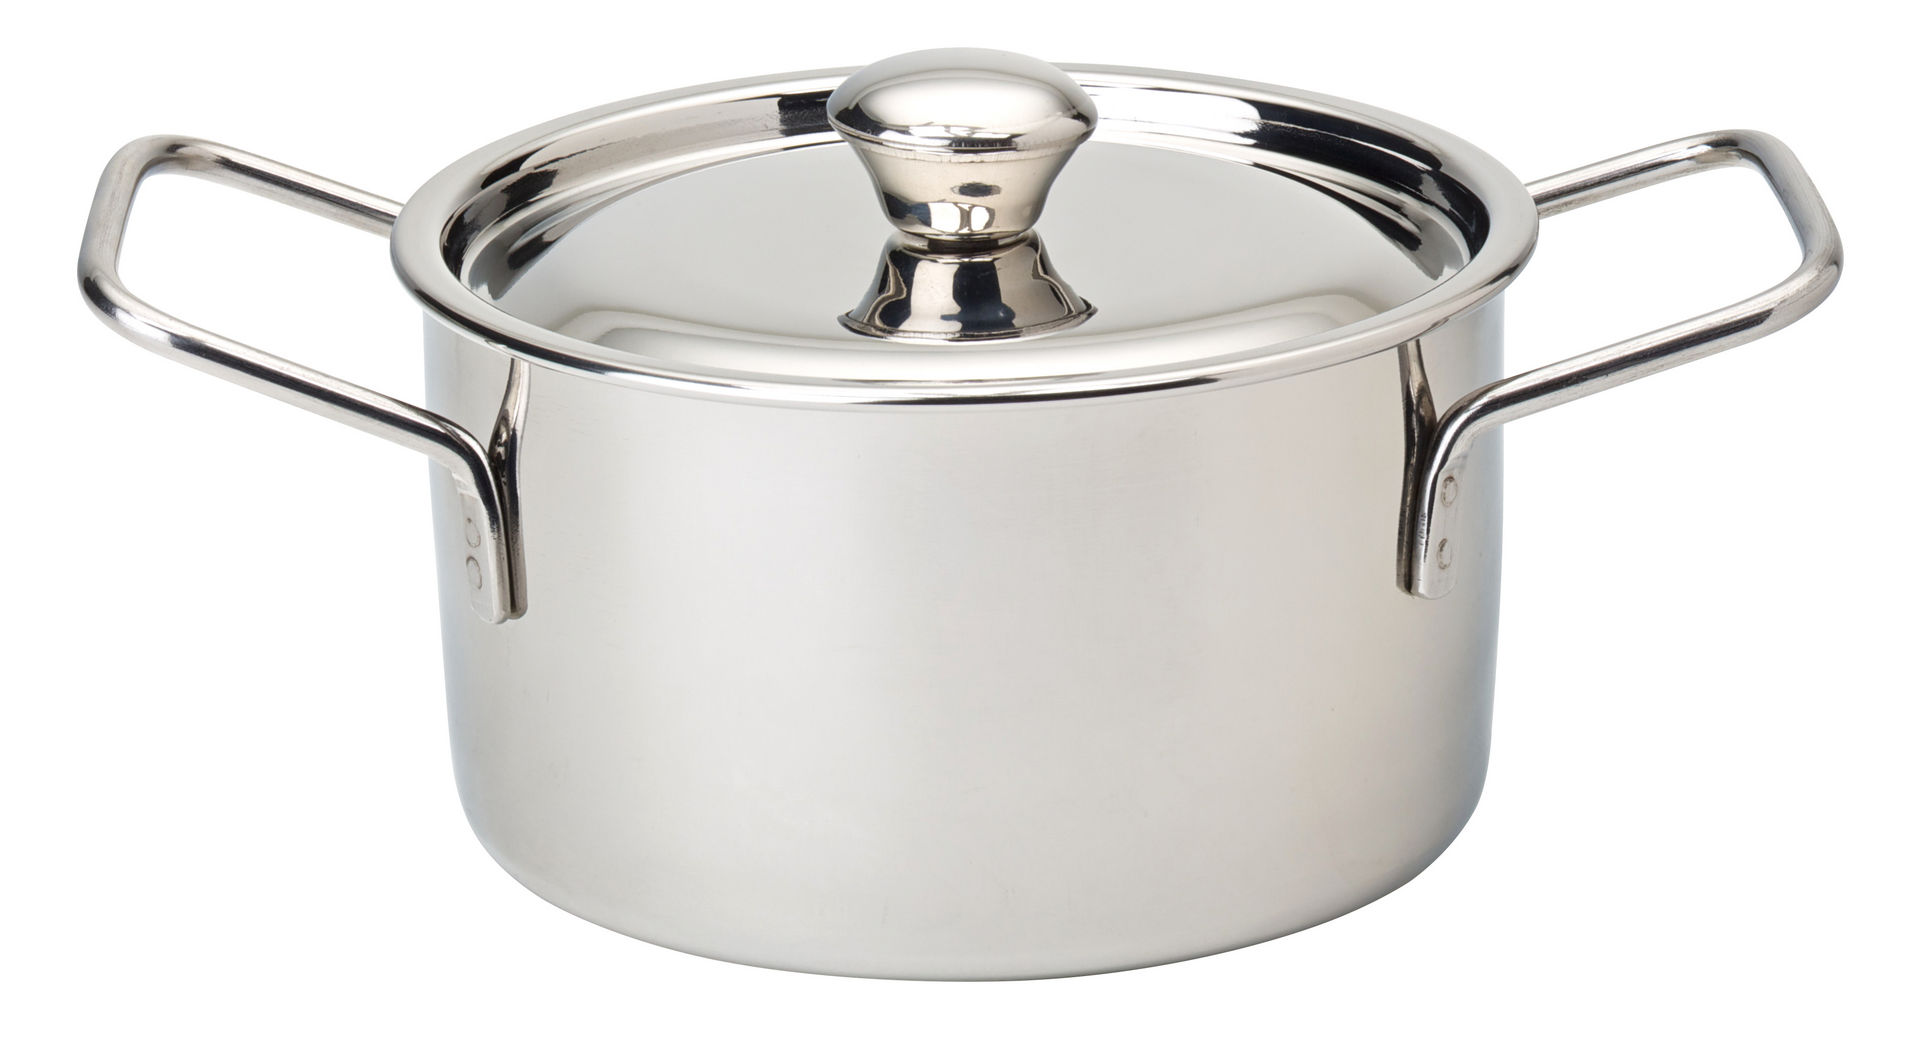 Stainless S Handled Casserole 4